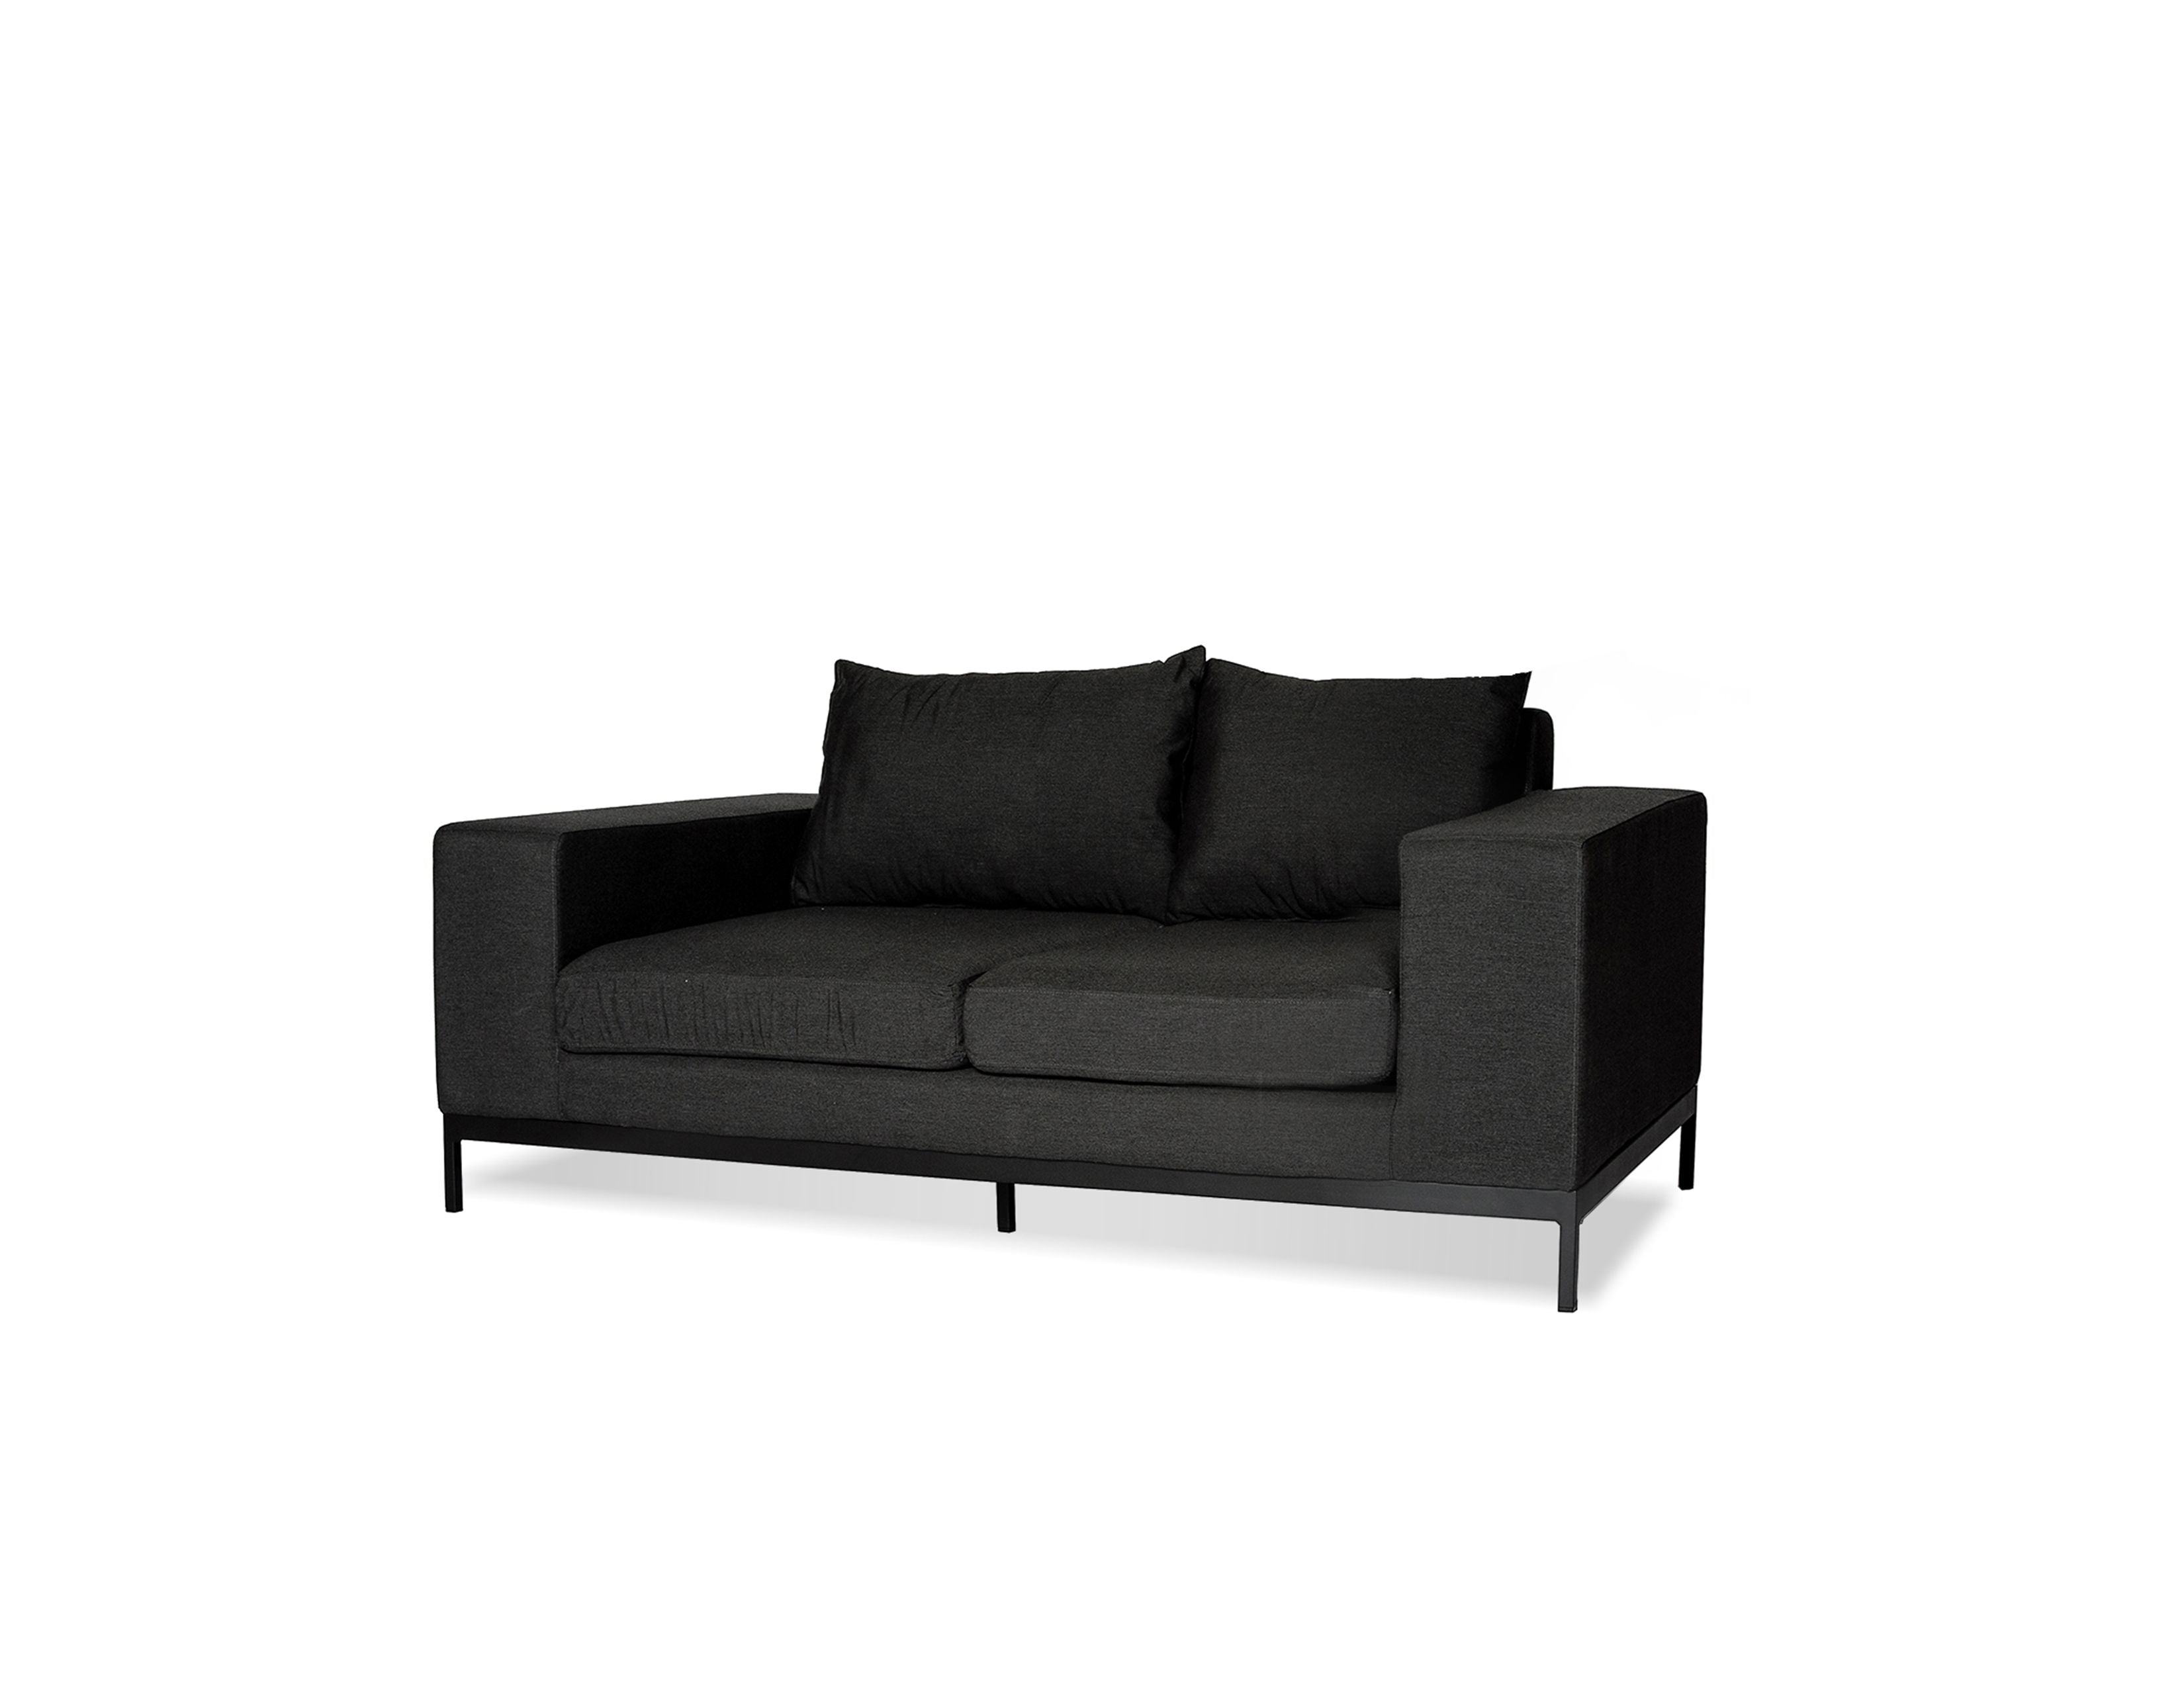 JERICHO Fabric Loveseat in Charcoal